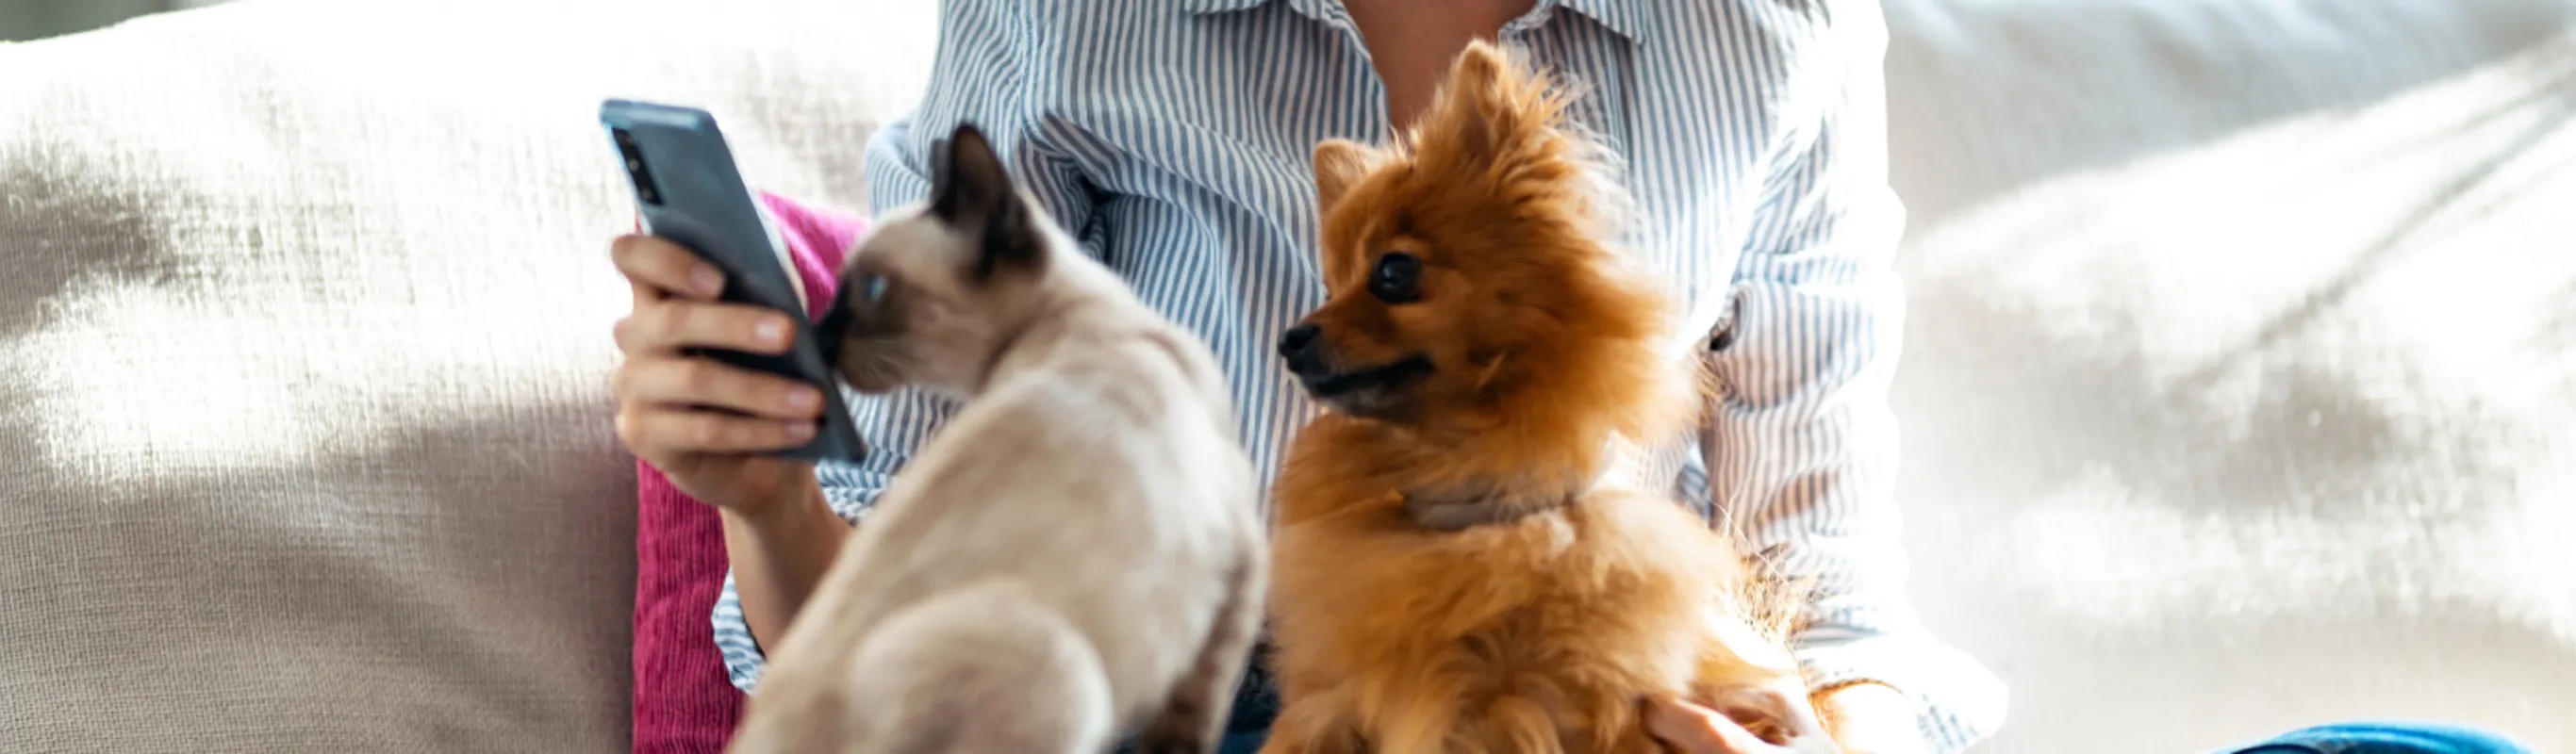 Pet owner sitting on couch with pomeranian and cat